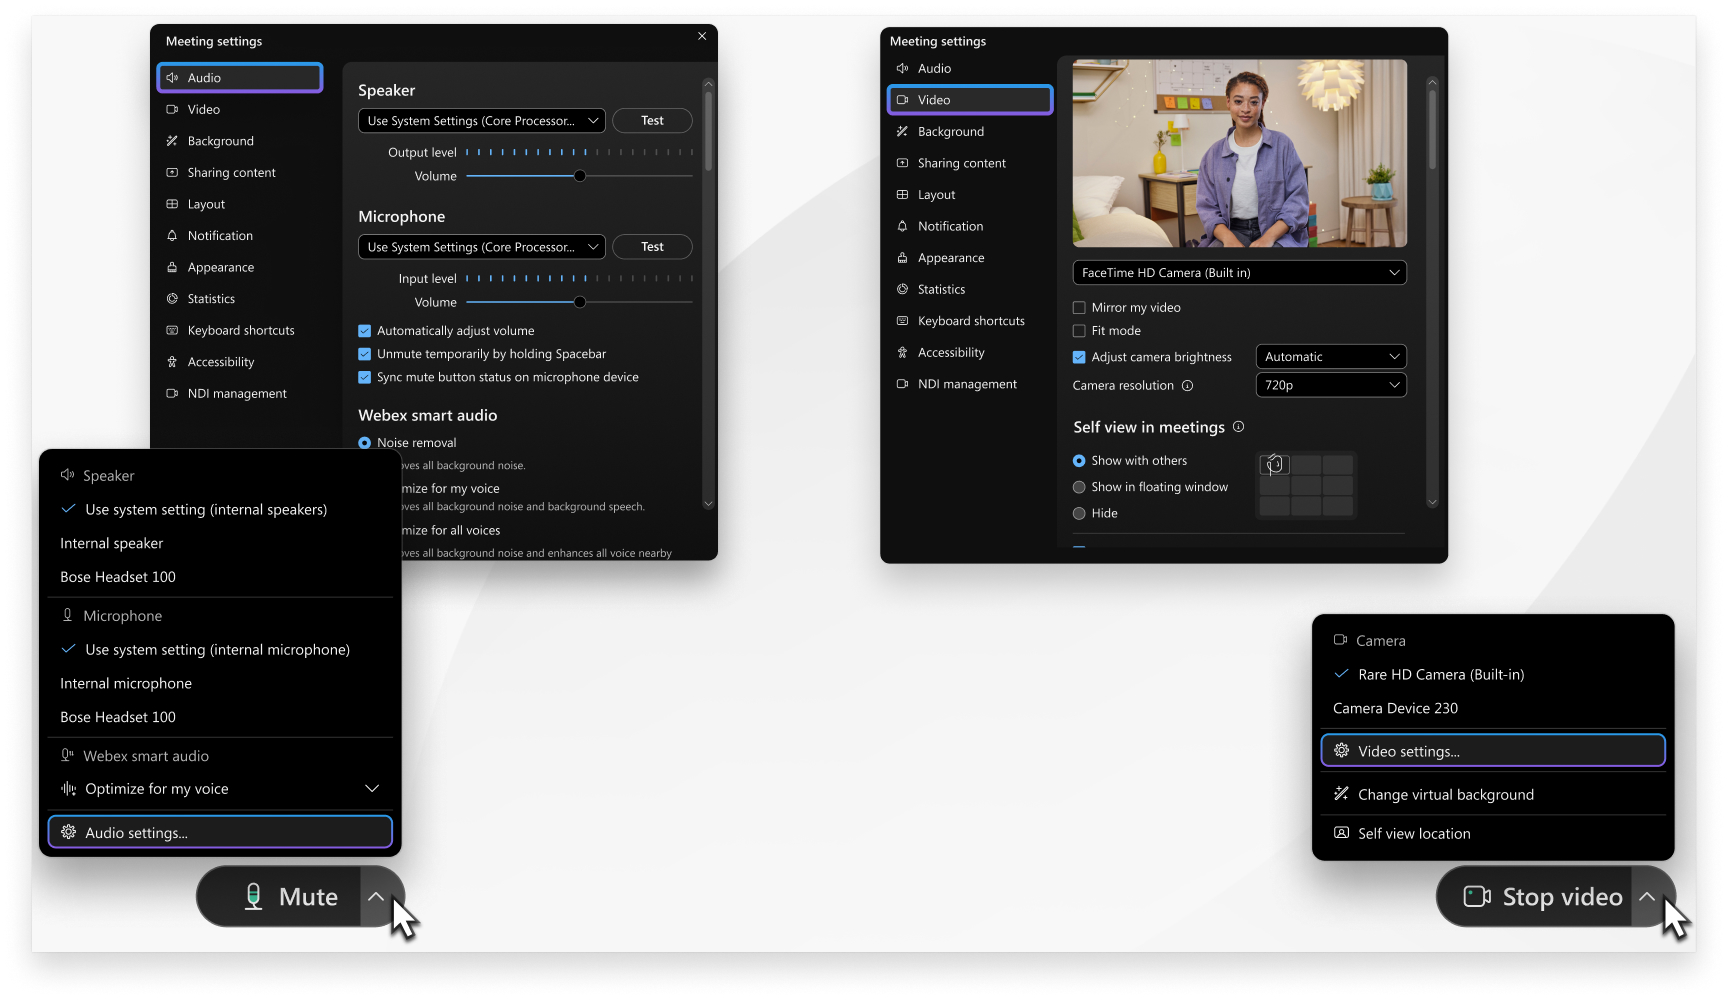 access audio and video settings during a call or meeting from your meeting controls